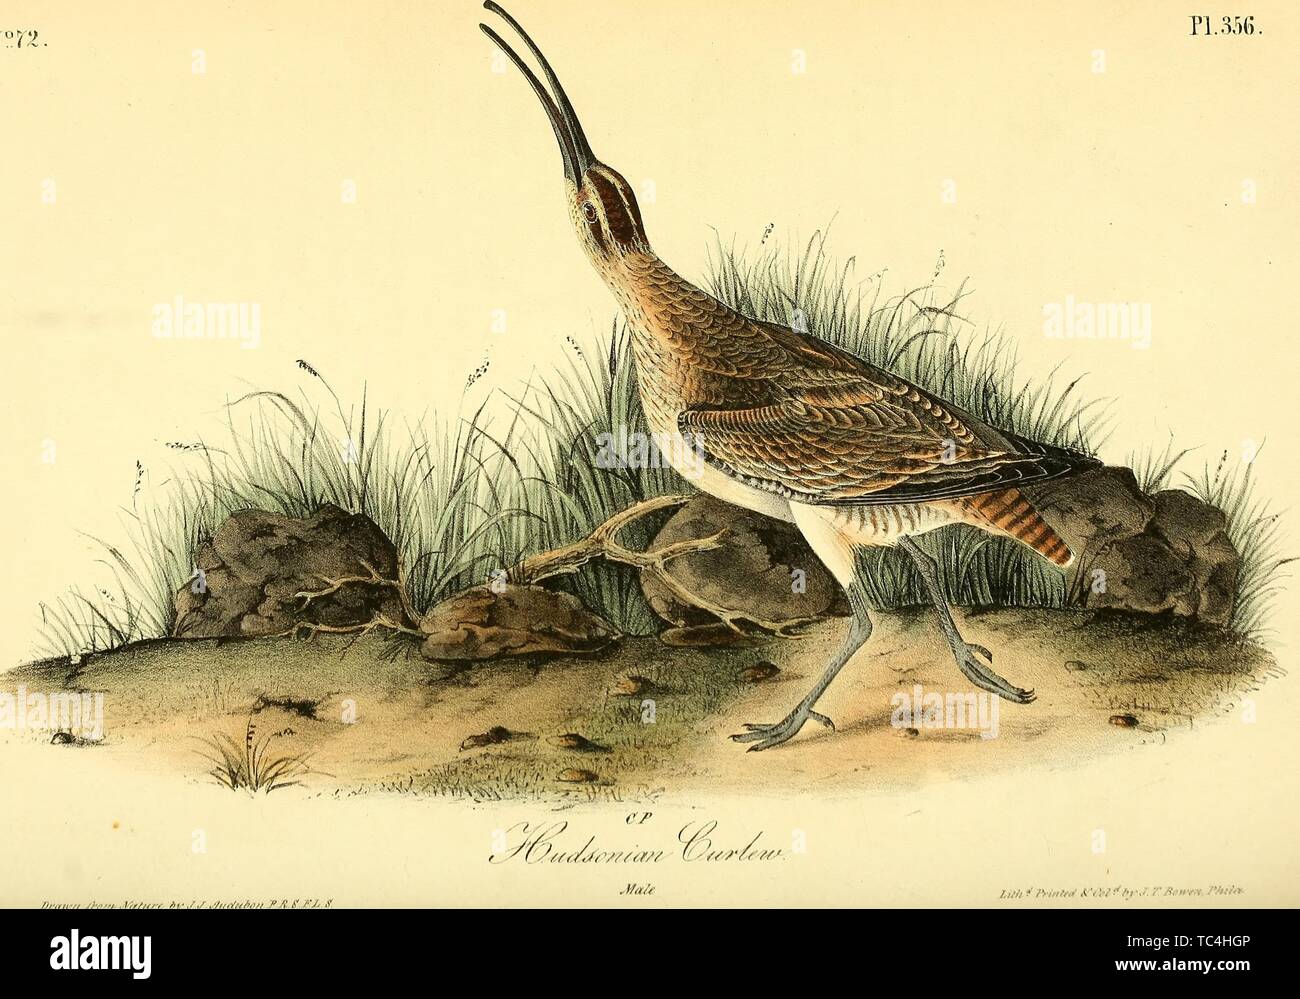 Engraving of the Hudsonian Curlew (Numenius Hudsonicus), from the book 'The birds of America, from drawings made in the United States and their territories' by John James Audubon, 1840. Courtesy Internet Archive. () Stock Photo